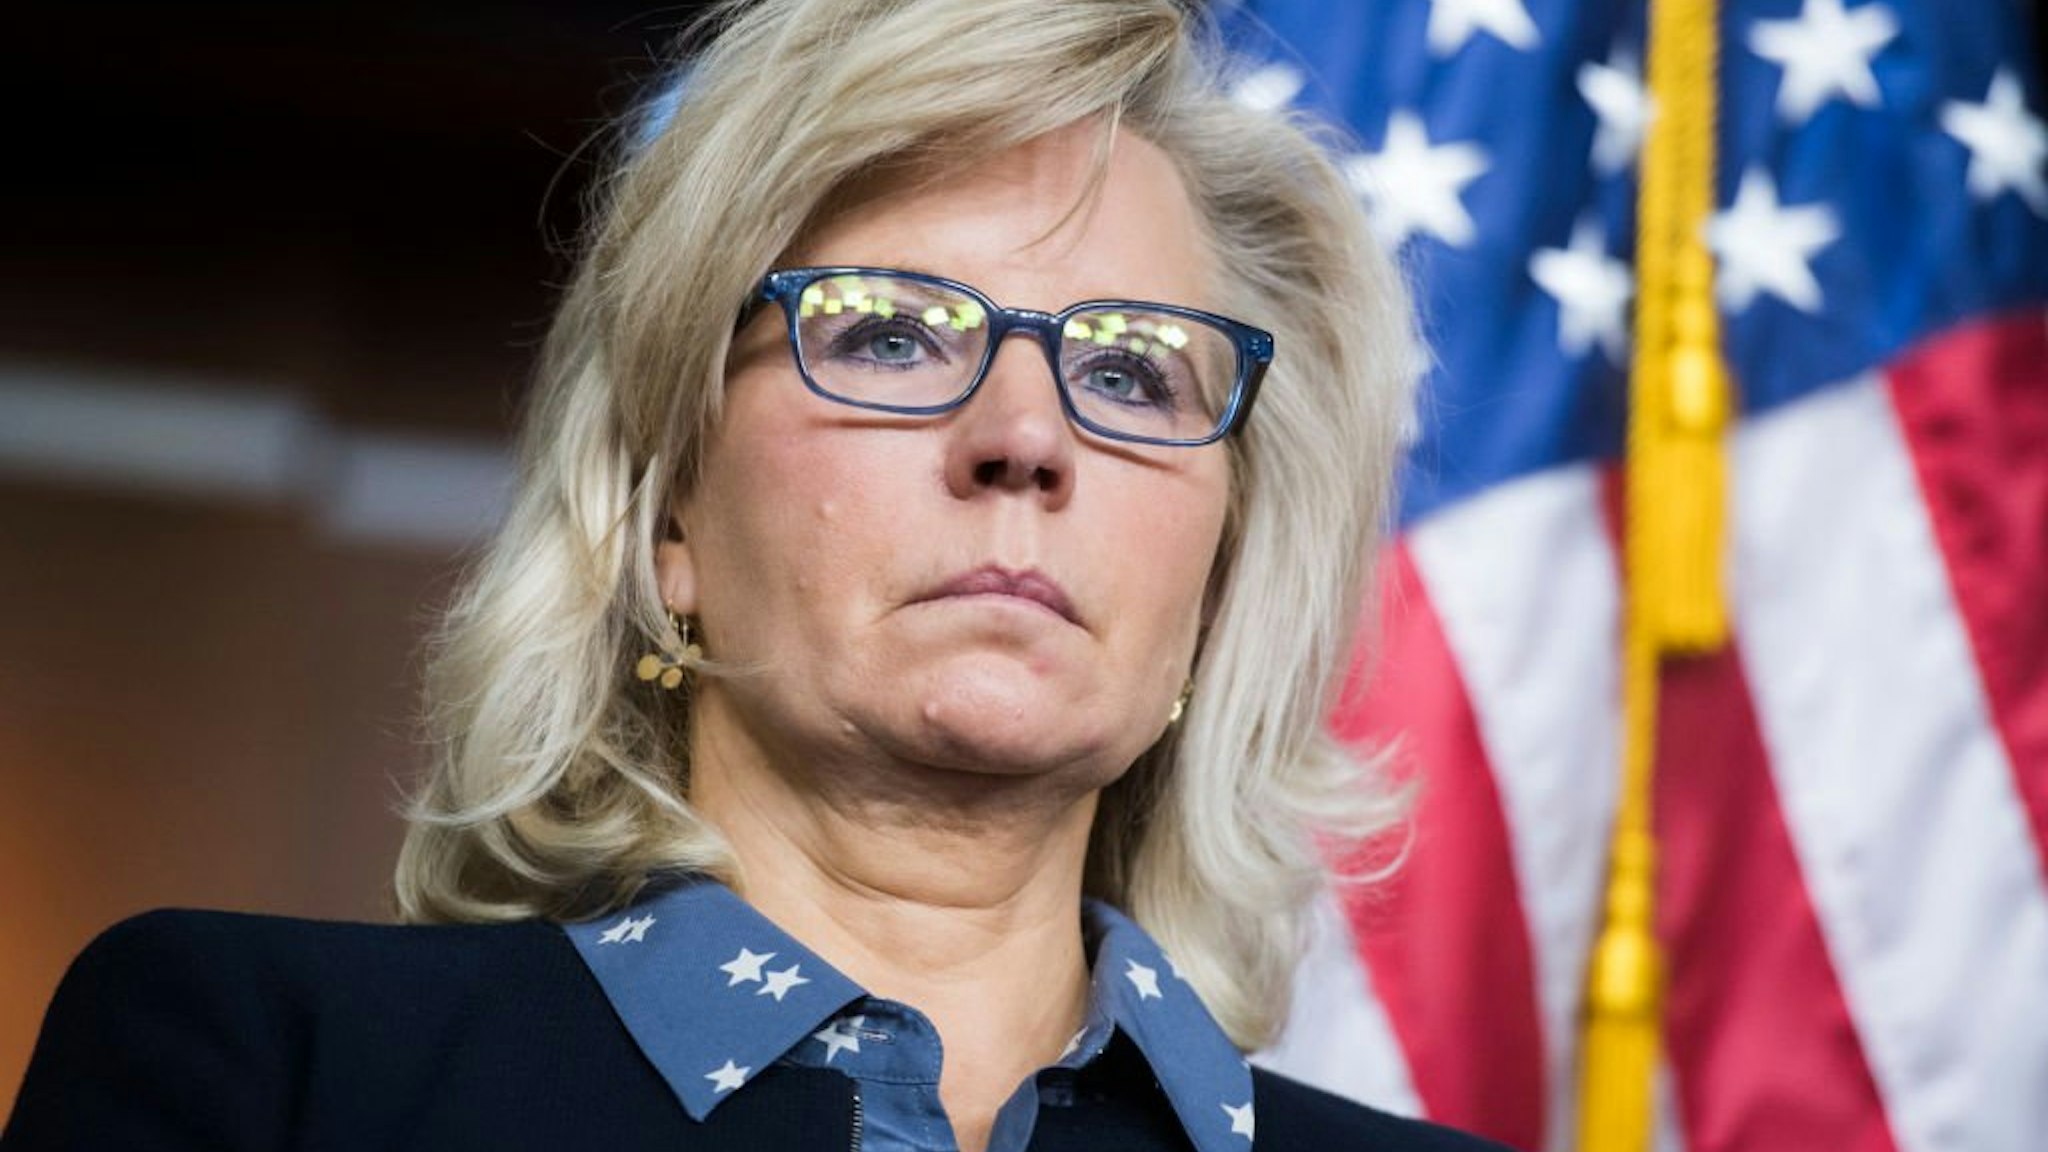 Liz Cheney, R-Wyo., conducts a news conference after a meeting in the Capitol Visitor Center